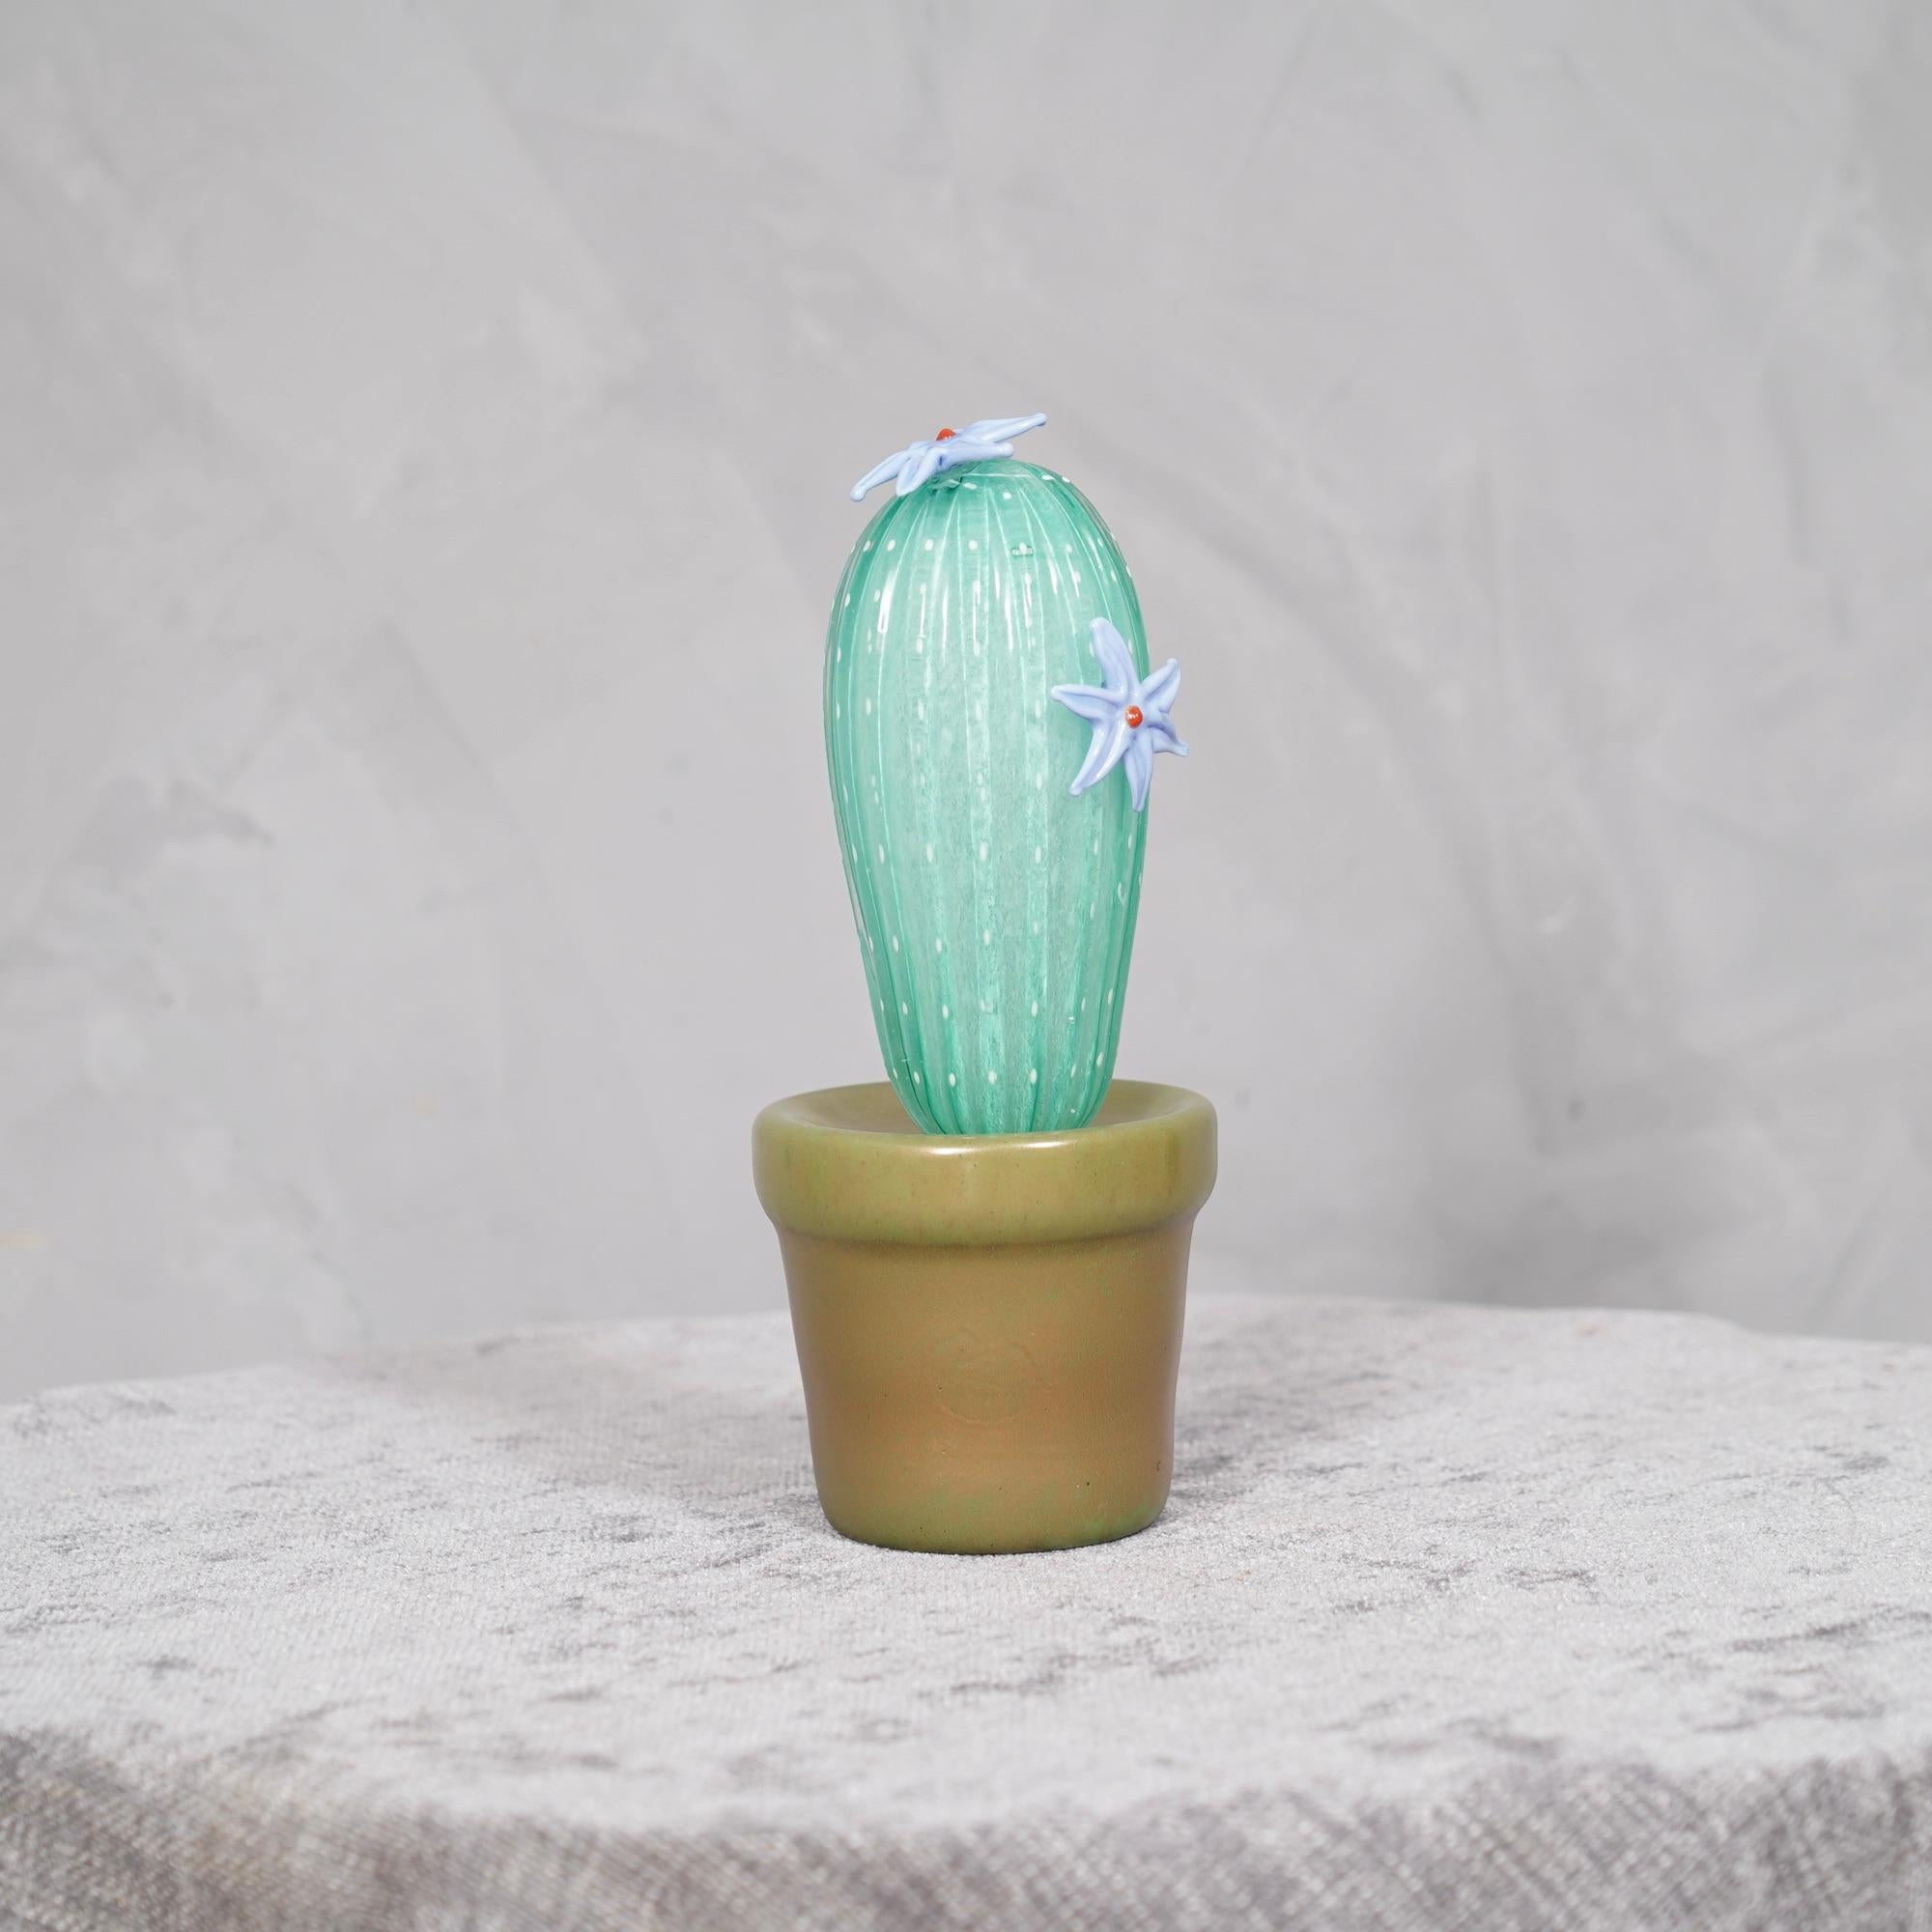 Italian design, this cactus is a fashion icon of the Italian style, water green with a beautiful green glass vase underneath.

In limited edition, manufactured in one of the furnaces in Venice, the cacti are in Murano glass have a vase in green